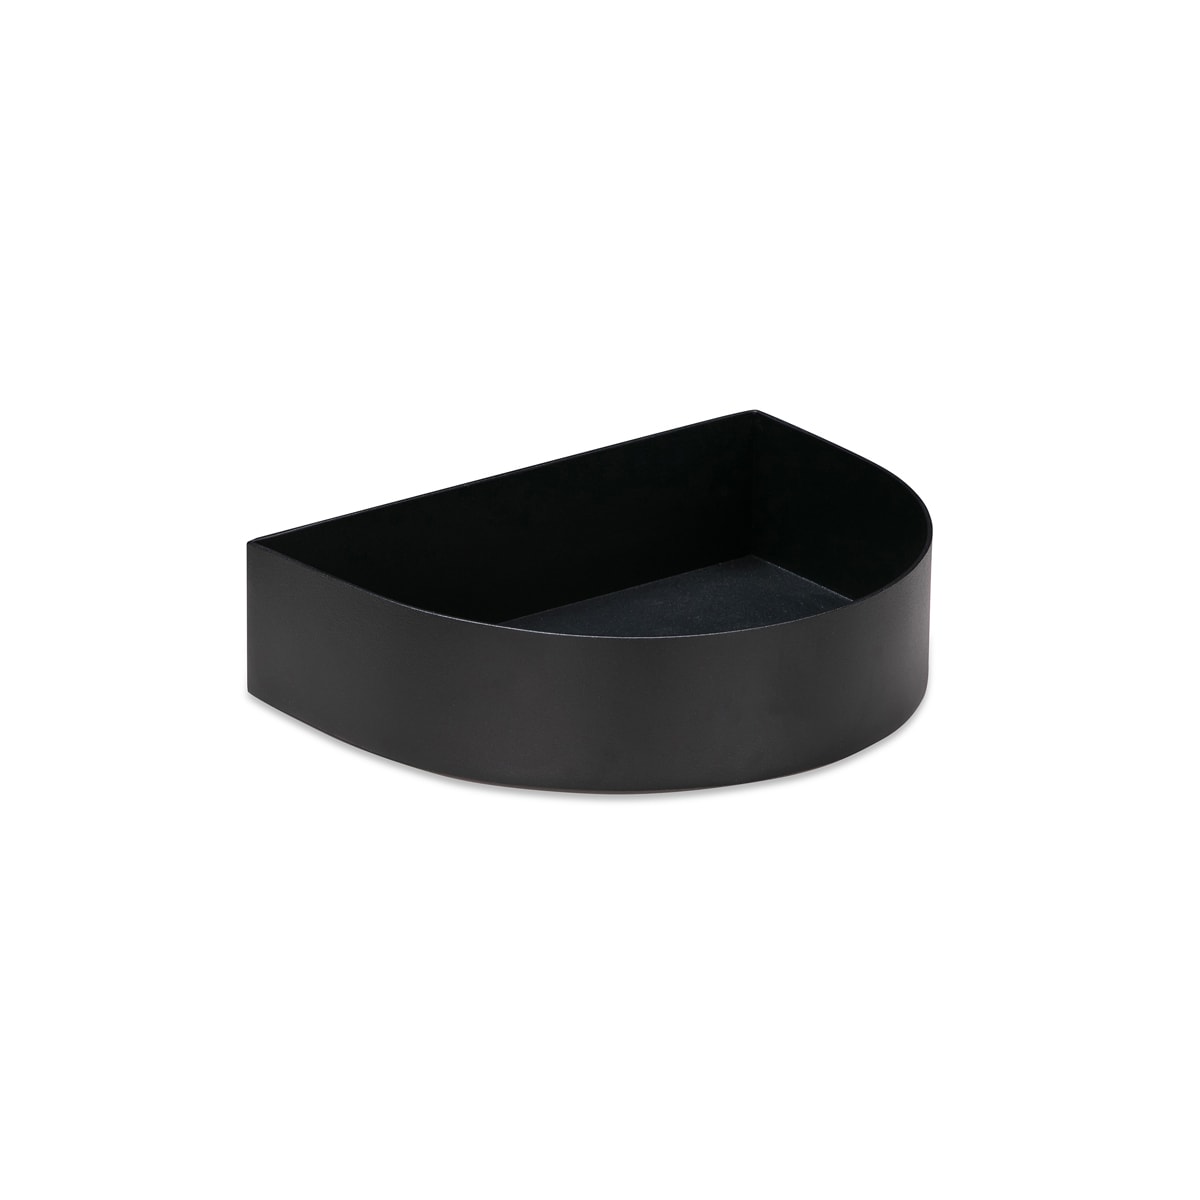 Valley Wall Shelf 20Cm - Black - Styled Image by RJ Living